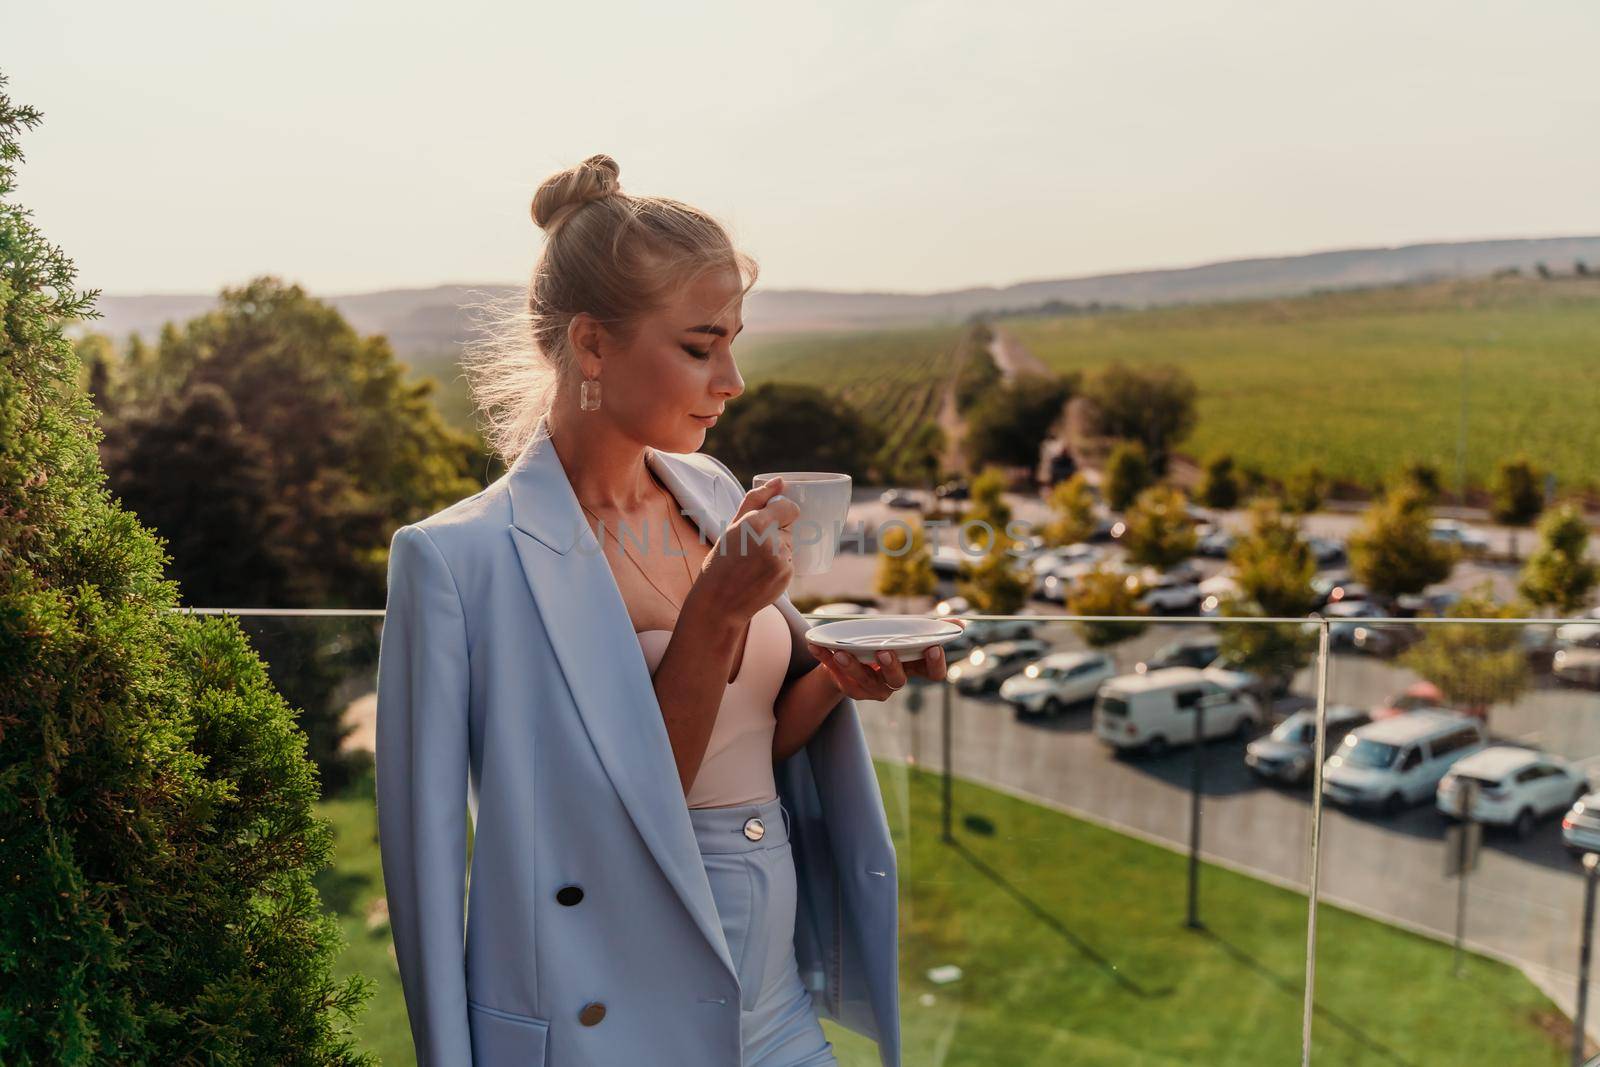 A middle-aged woman stands in a street cafe overlooking the mountains at sunset. She is wearing a blue jacket and drinking coffee while admiring nature. Travel and vacation concept